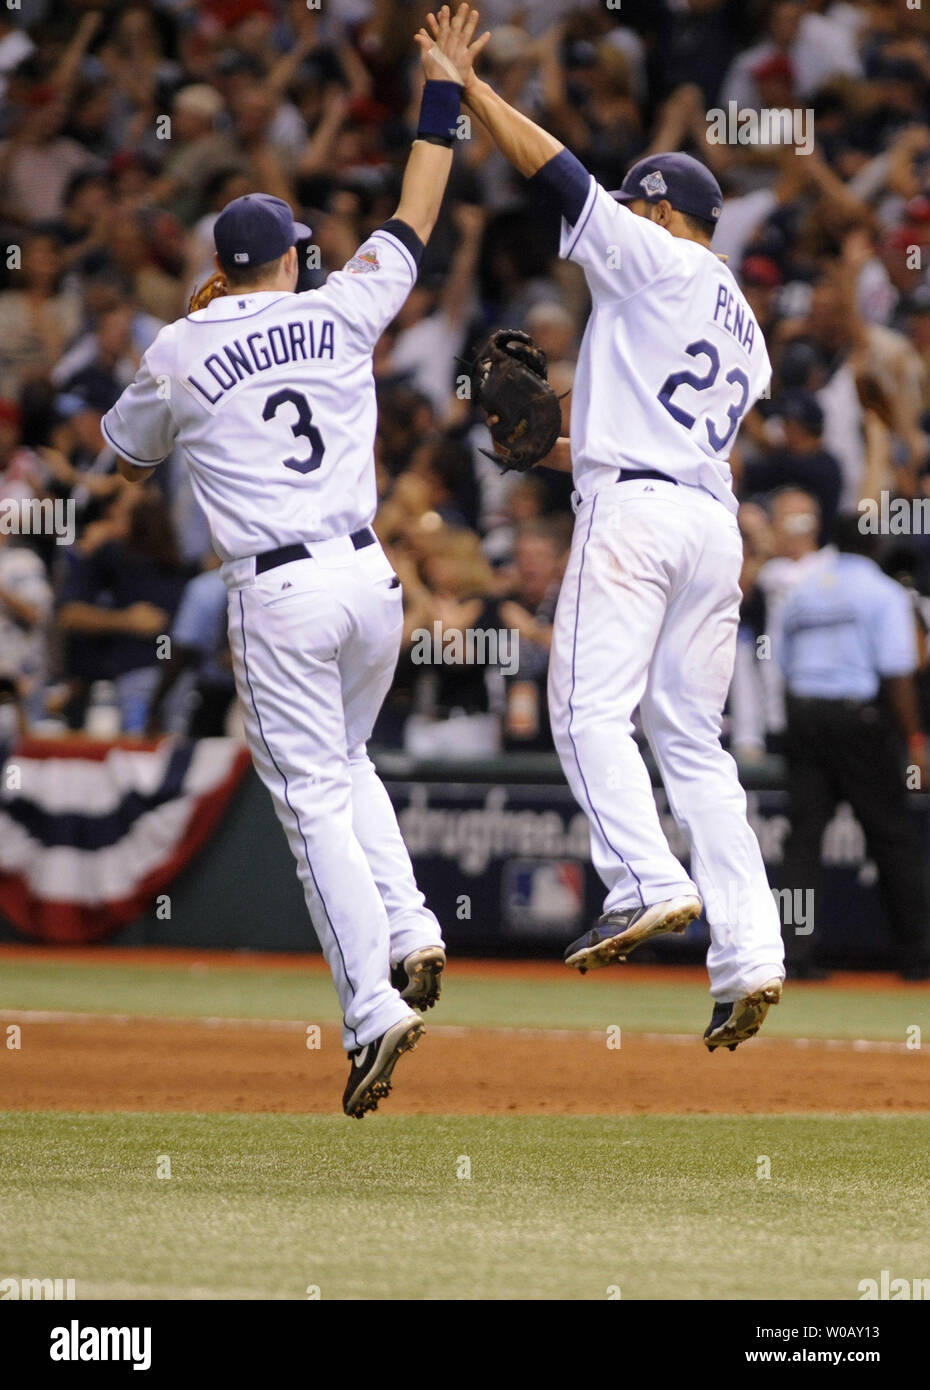 Tampa Bay Rays first baseman Carlos Pena (23) and Evan Longoria celebrate after defeating the Philadelphia Phillies 4-2 to win game two of the World Series at Tropicana Field in St. Petersburg, Florida on October 23, 2008.  (UPI Photo/Kevin Dietsch) Stock Photo